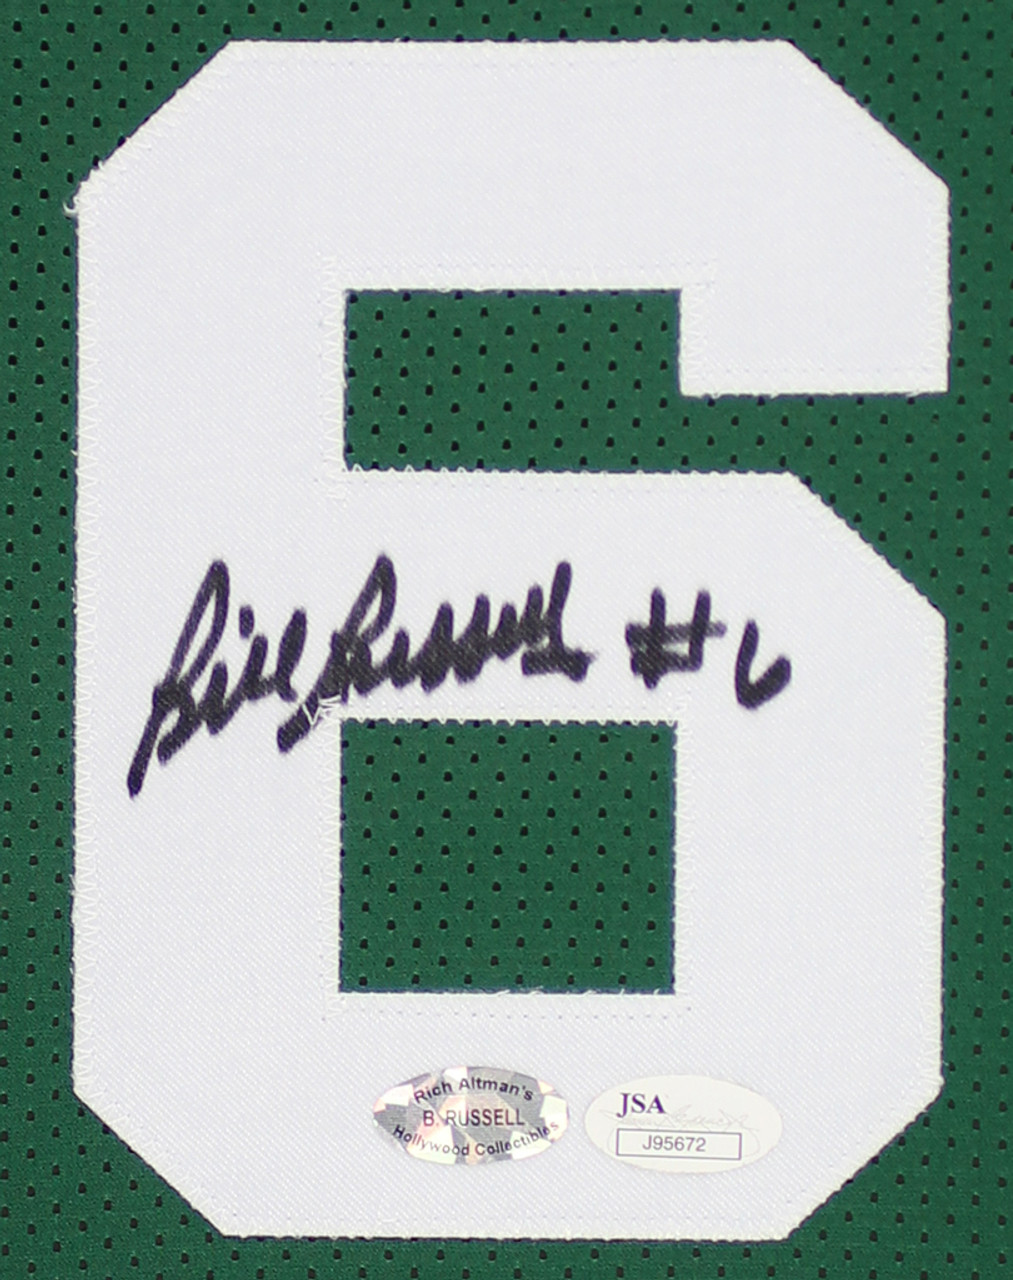 bill russell jersey products for sale